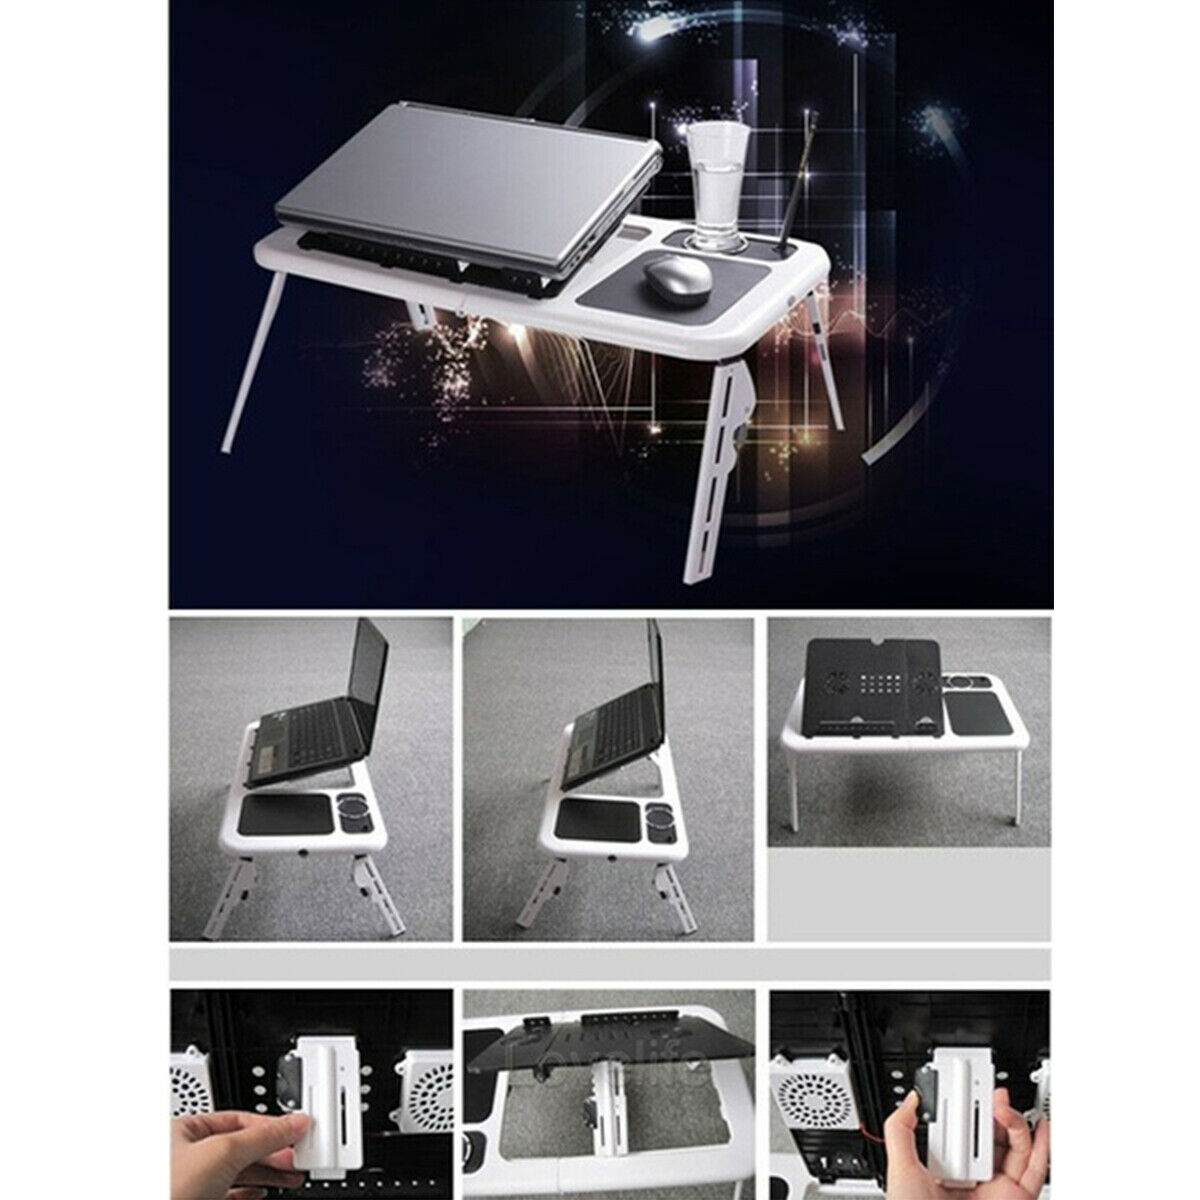 Laptop Stand E-Table. Foldable, Adjustable, Portable with Cooling Fans. Brand New Products.